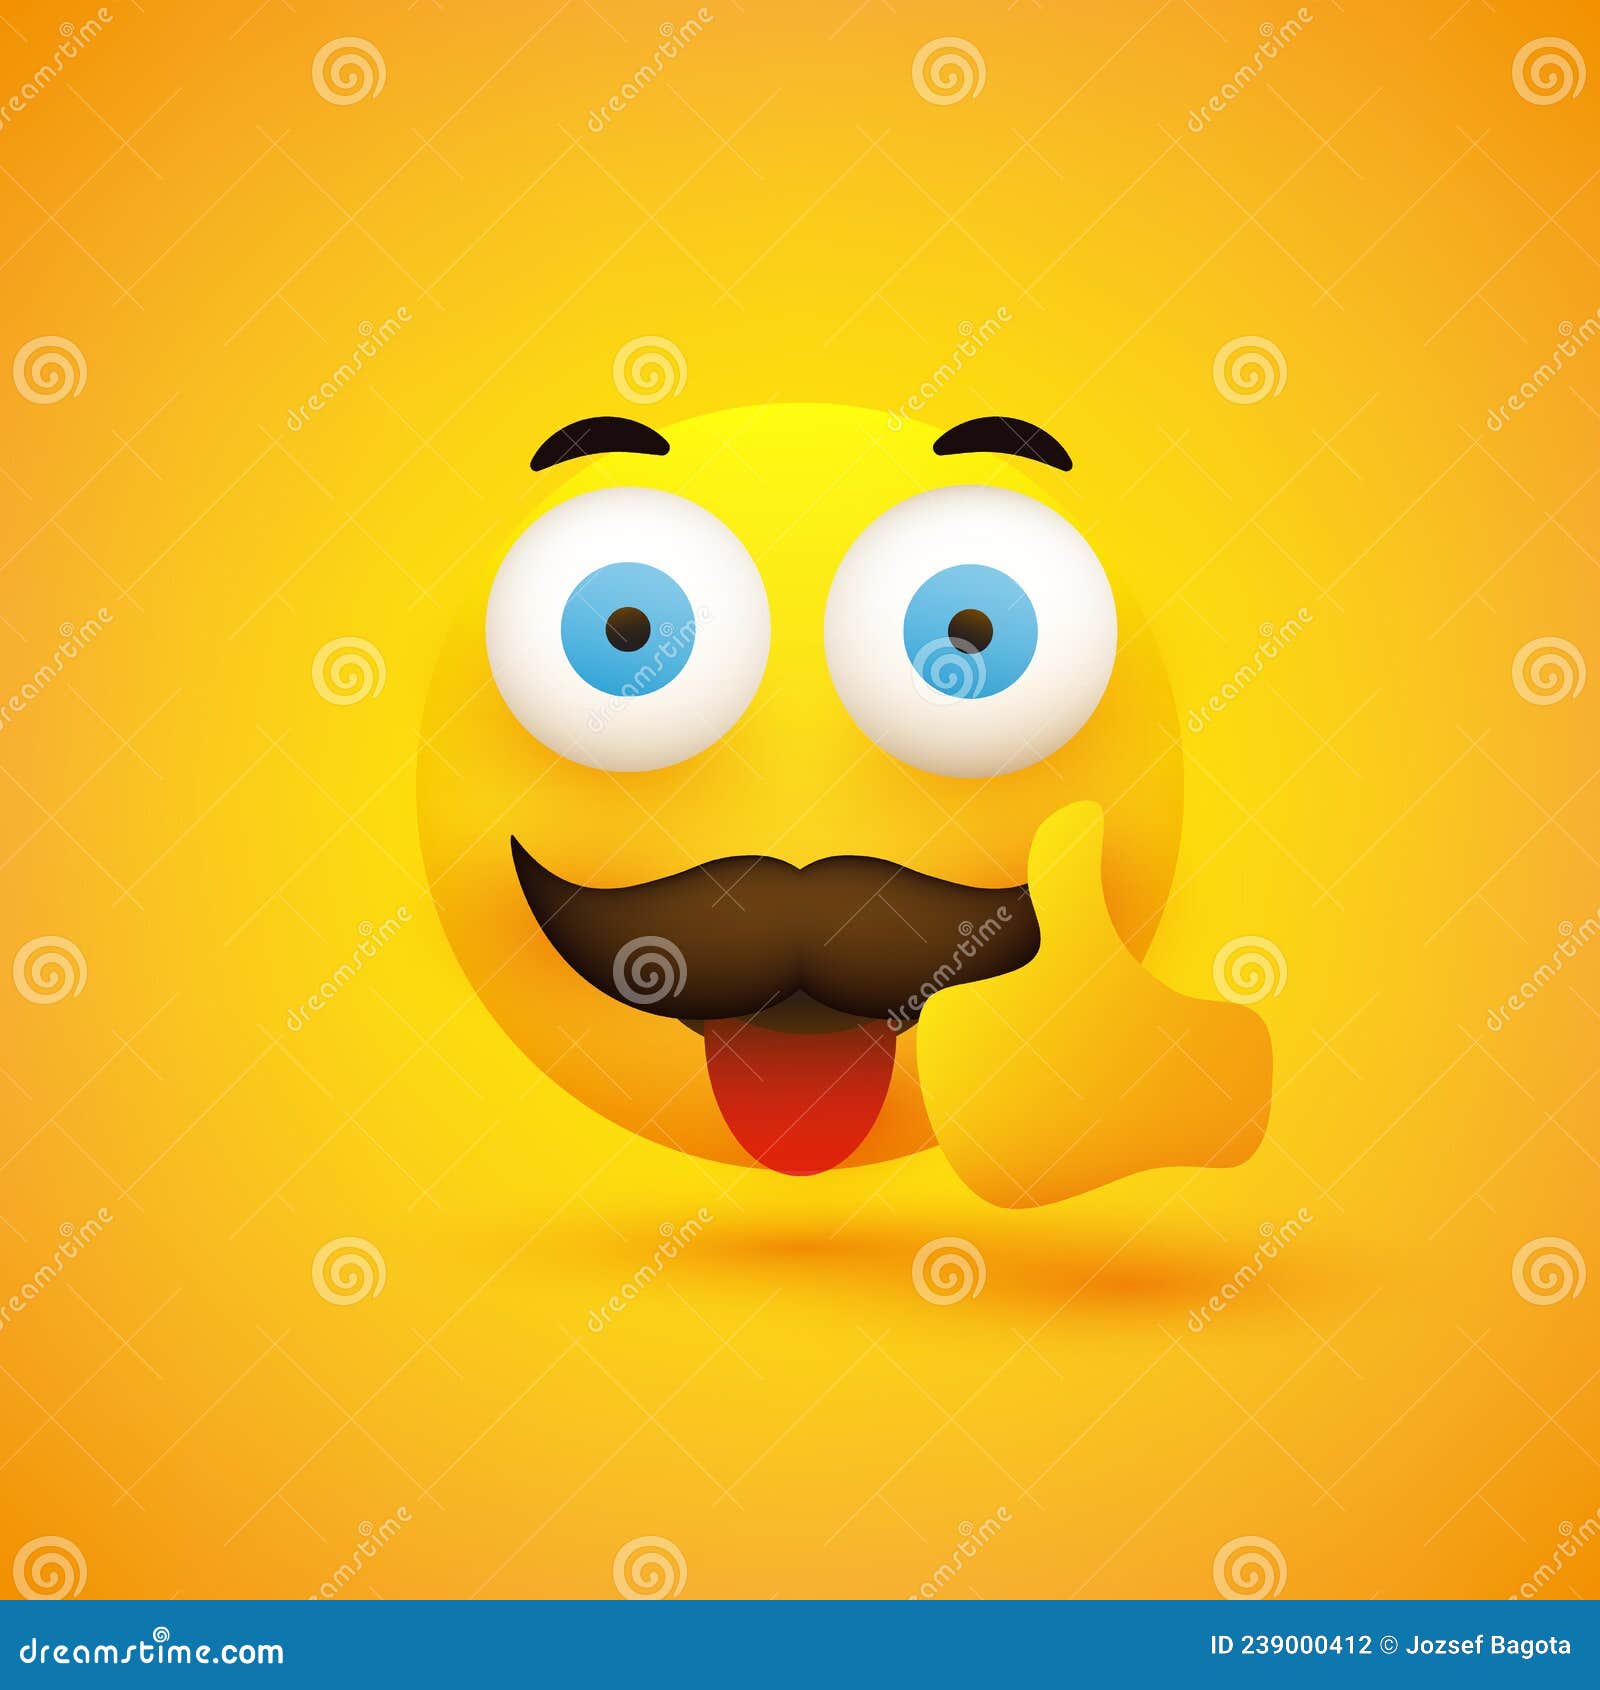 Smiling Emoji - Simple Happy Funny Male Emoticon with Stuck Out Tongue and  Mustache - Looking with Pop Out Wide Open Eyes Stock Vector - Illustration  of emoji, cheering: 239000412